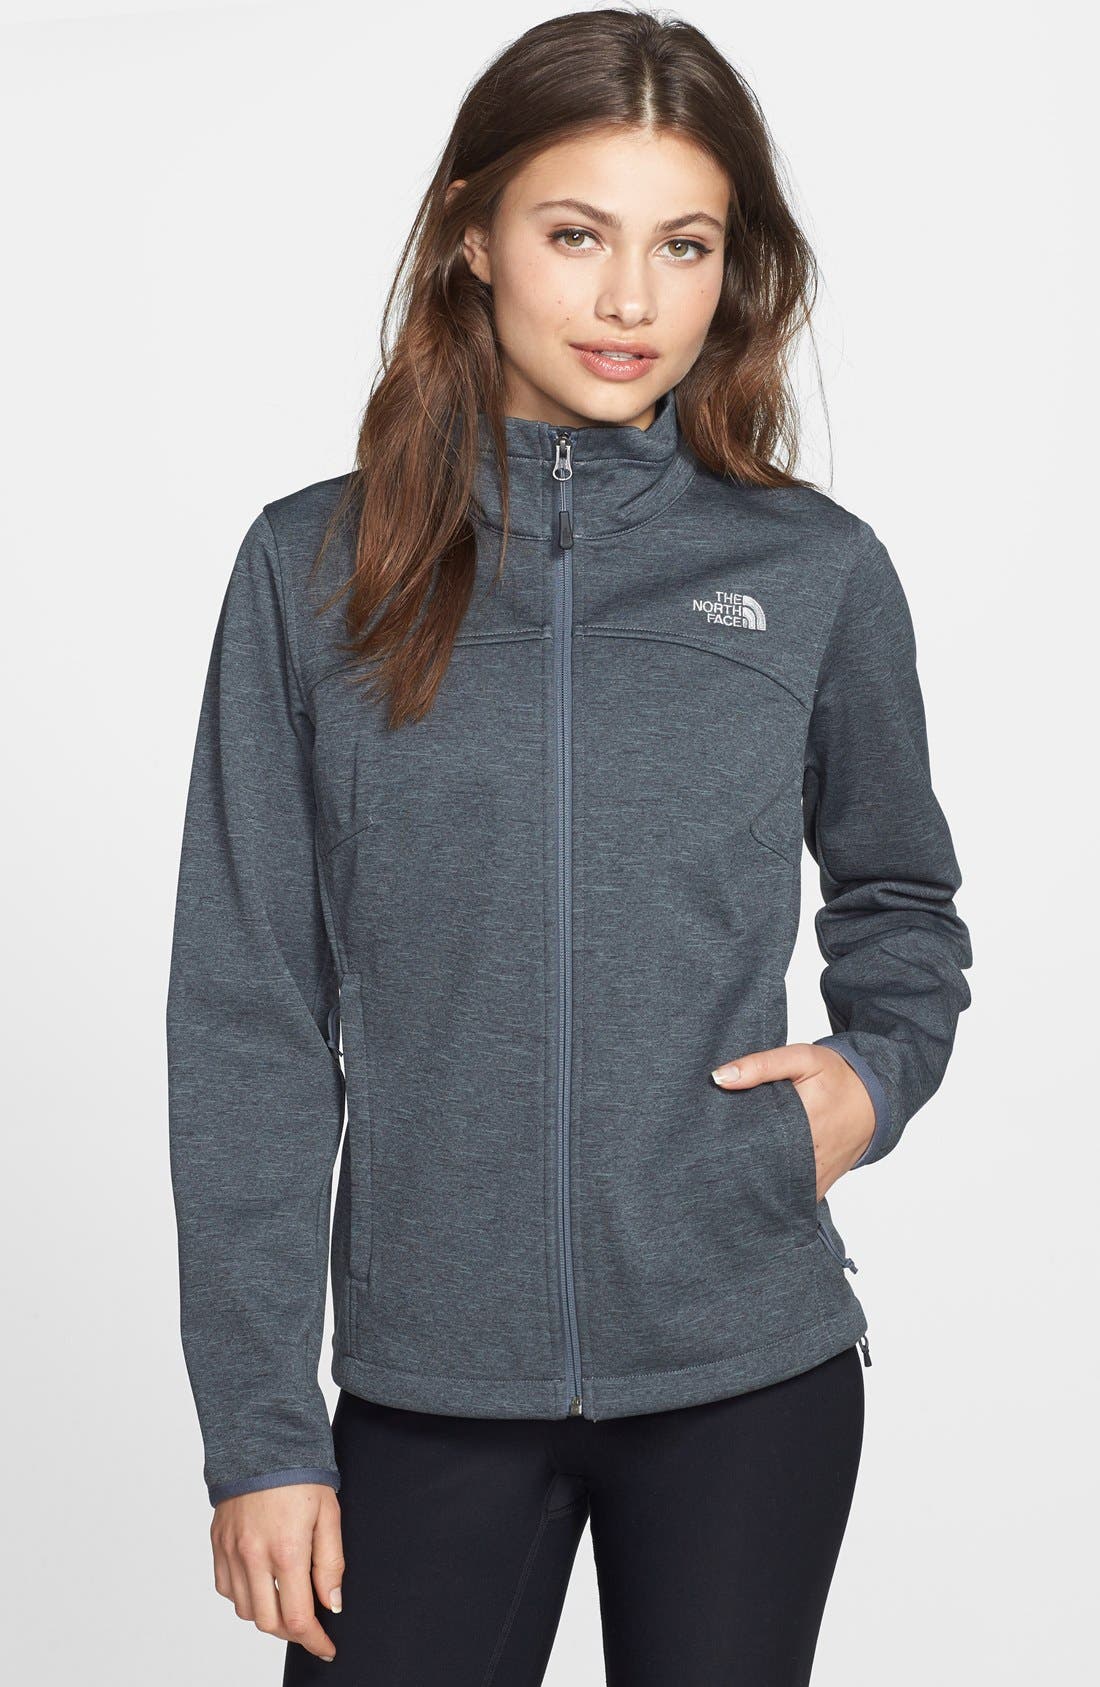 North Face 'Canyonwall' Jacket | Nordstrom